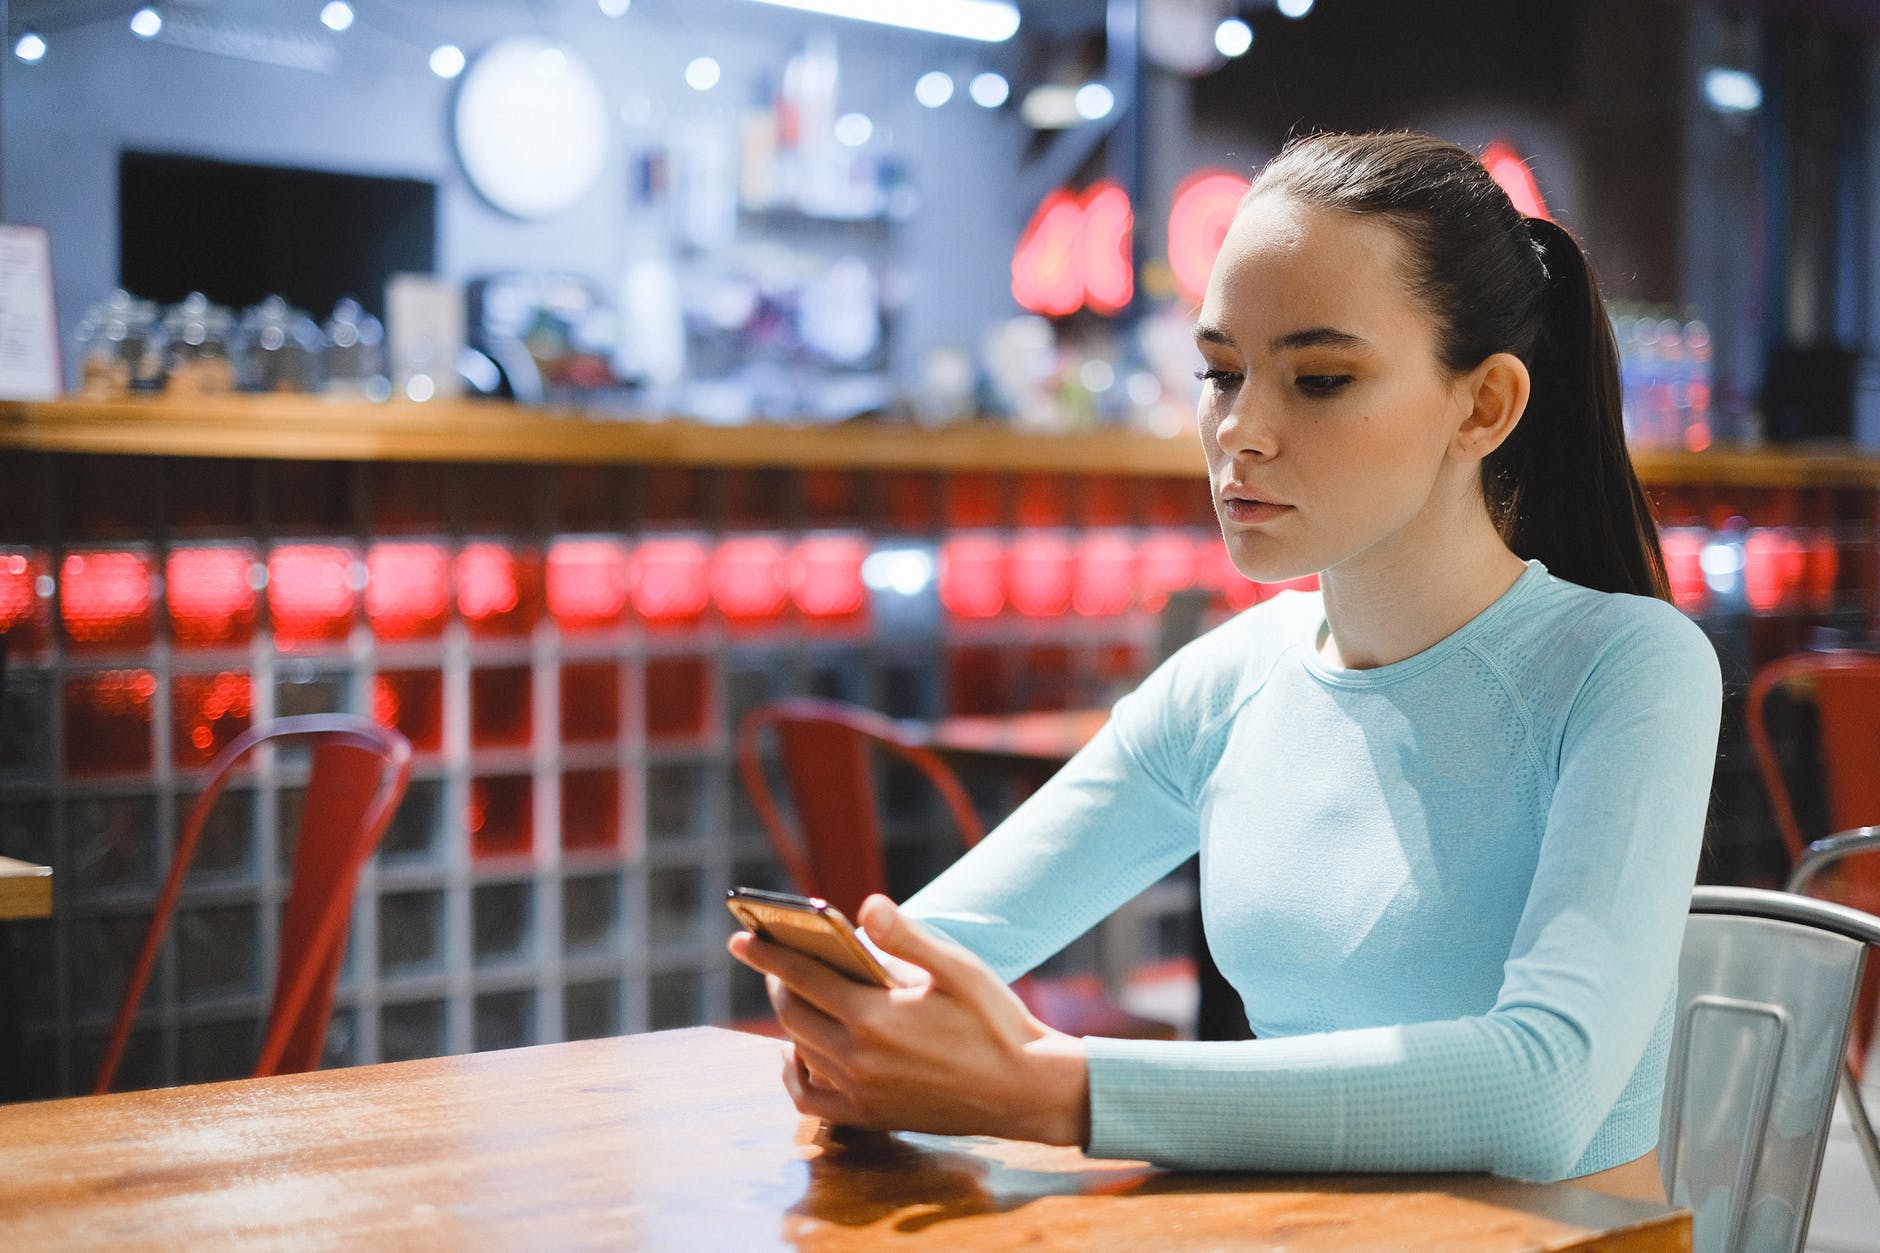 Young woman looking at her cellphone in a coffee shop | Source: Pexels